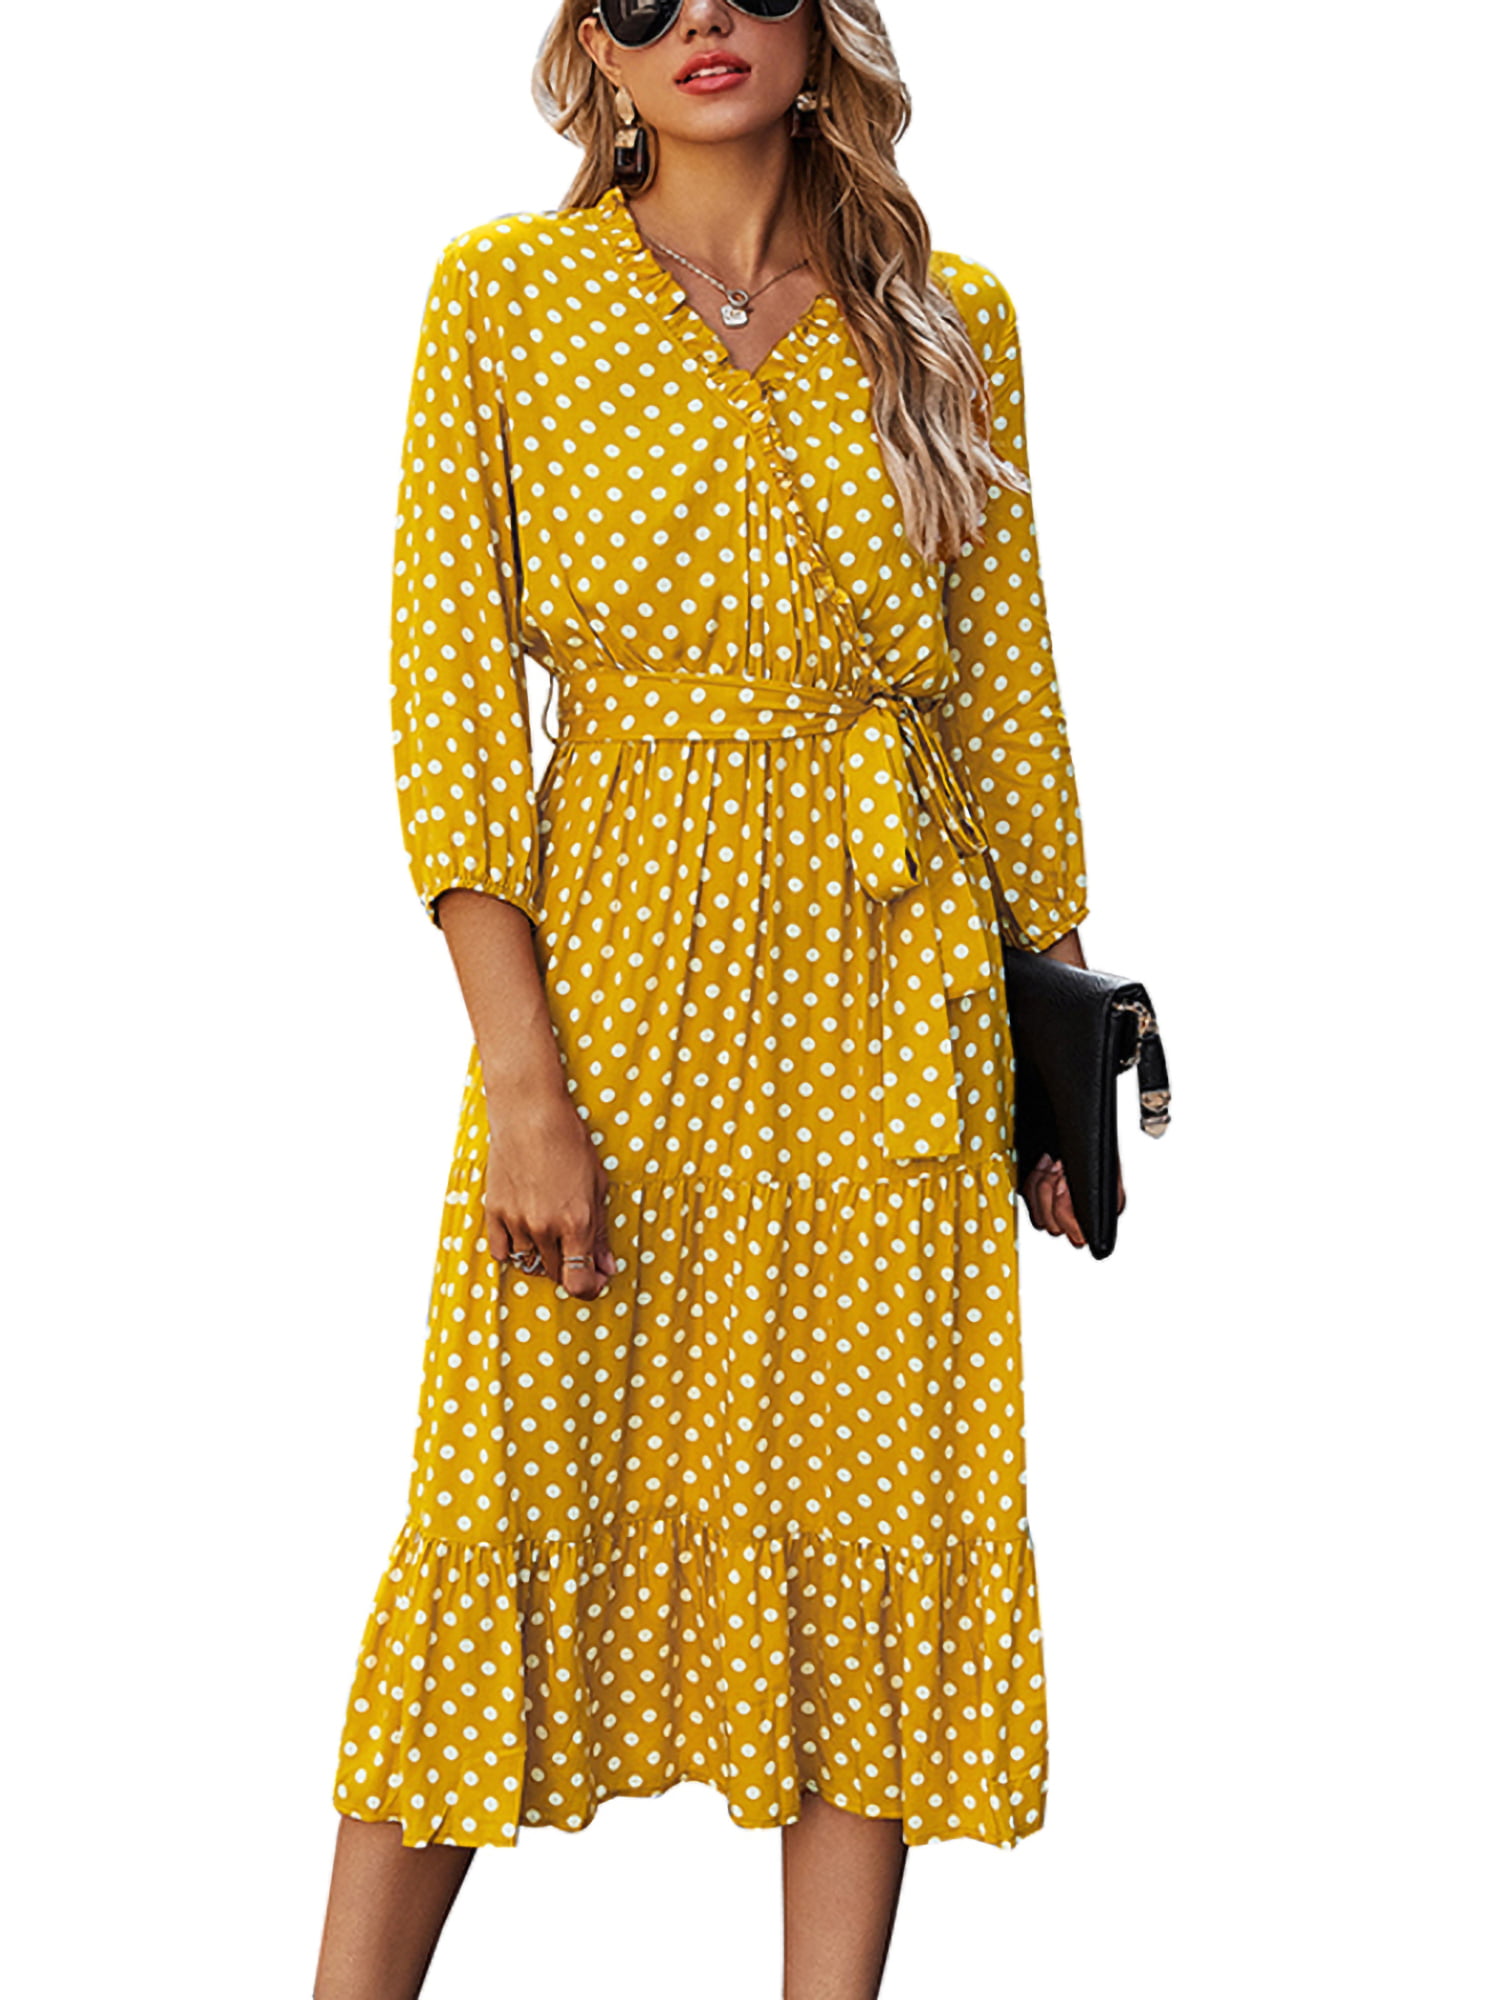 Casual Midi Dress for Women Polka Dot Ruffle Sleeves Flowy A Line Swing Dress Cocktail Party Dress with Pockets